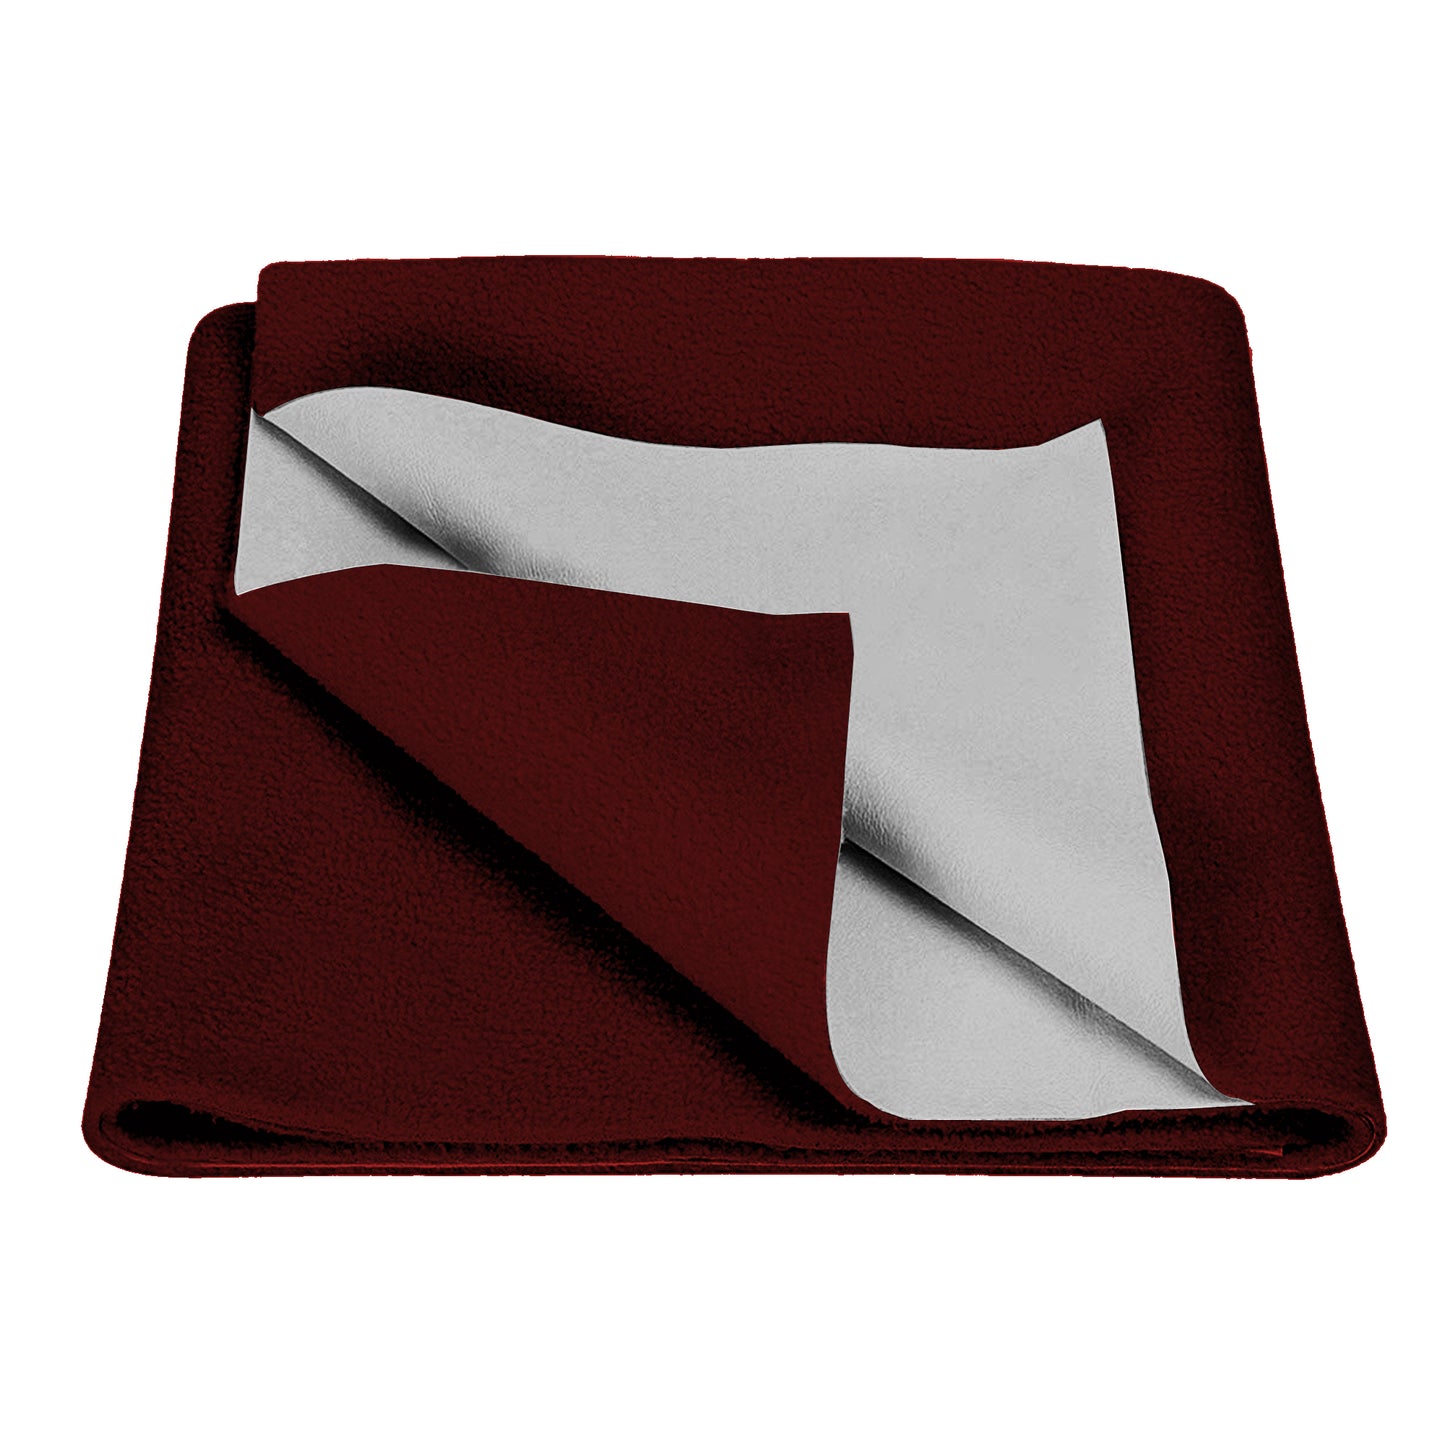 Waterproof Bed Protector, Extra Absorbent Quick Dry Sheet, Baby Bed Protector (70 X 50 CM), Pack of 2 -MAROON